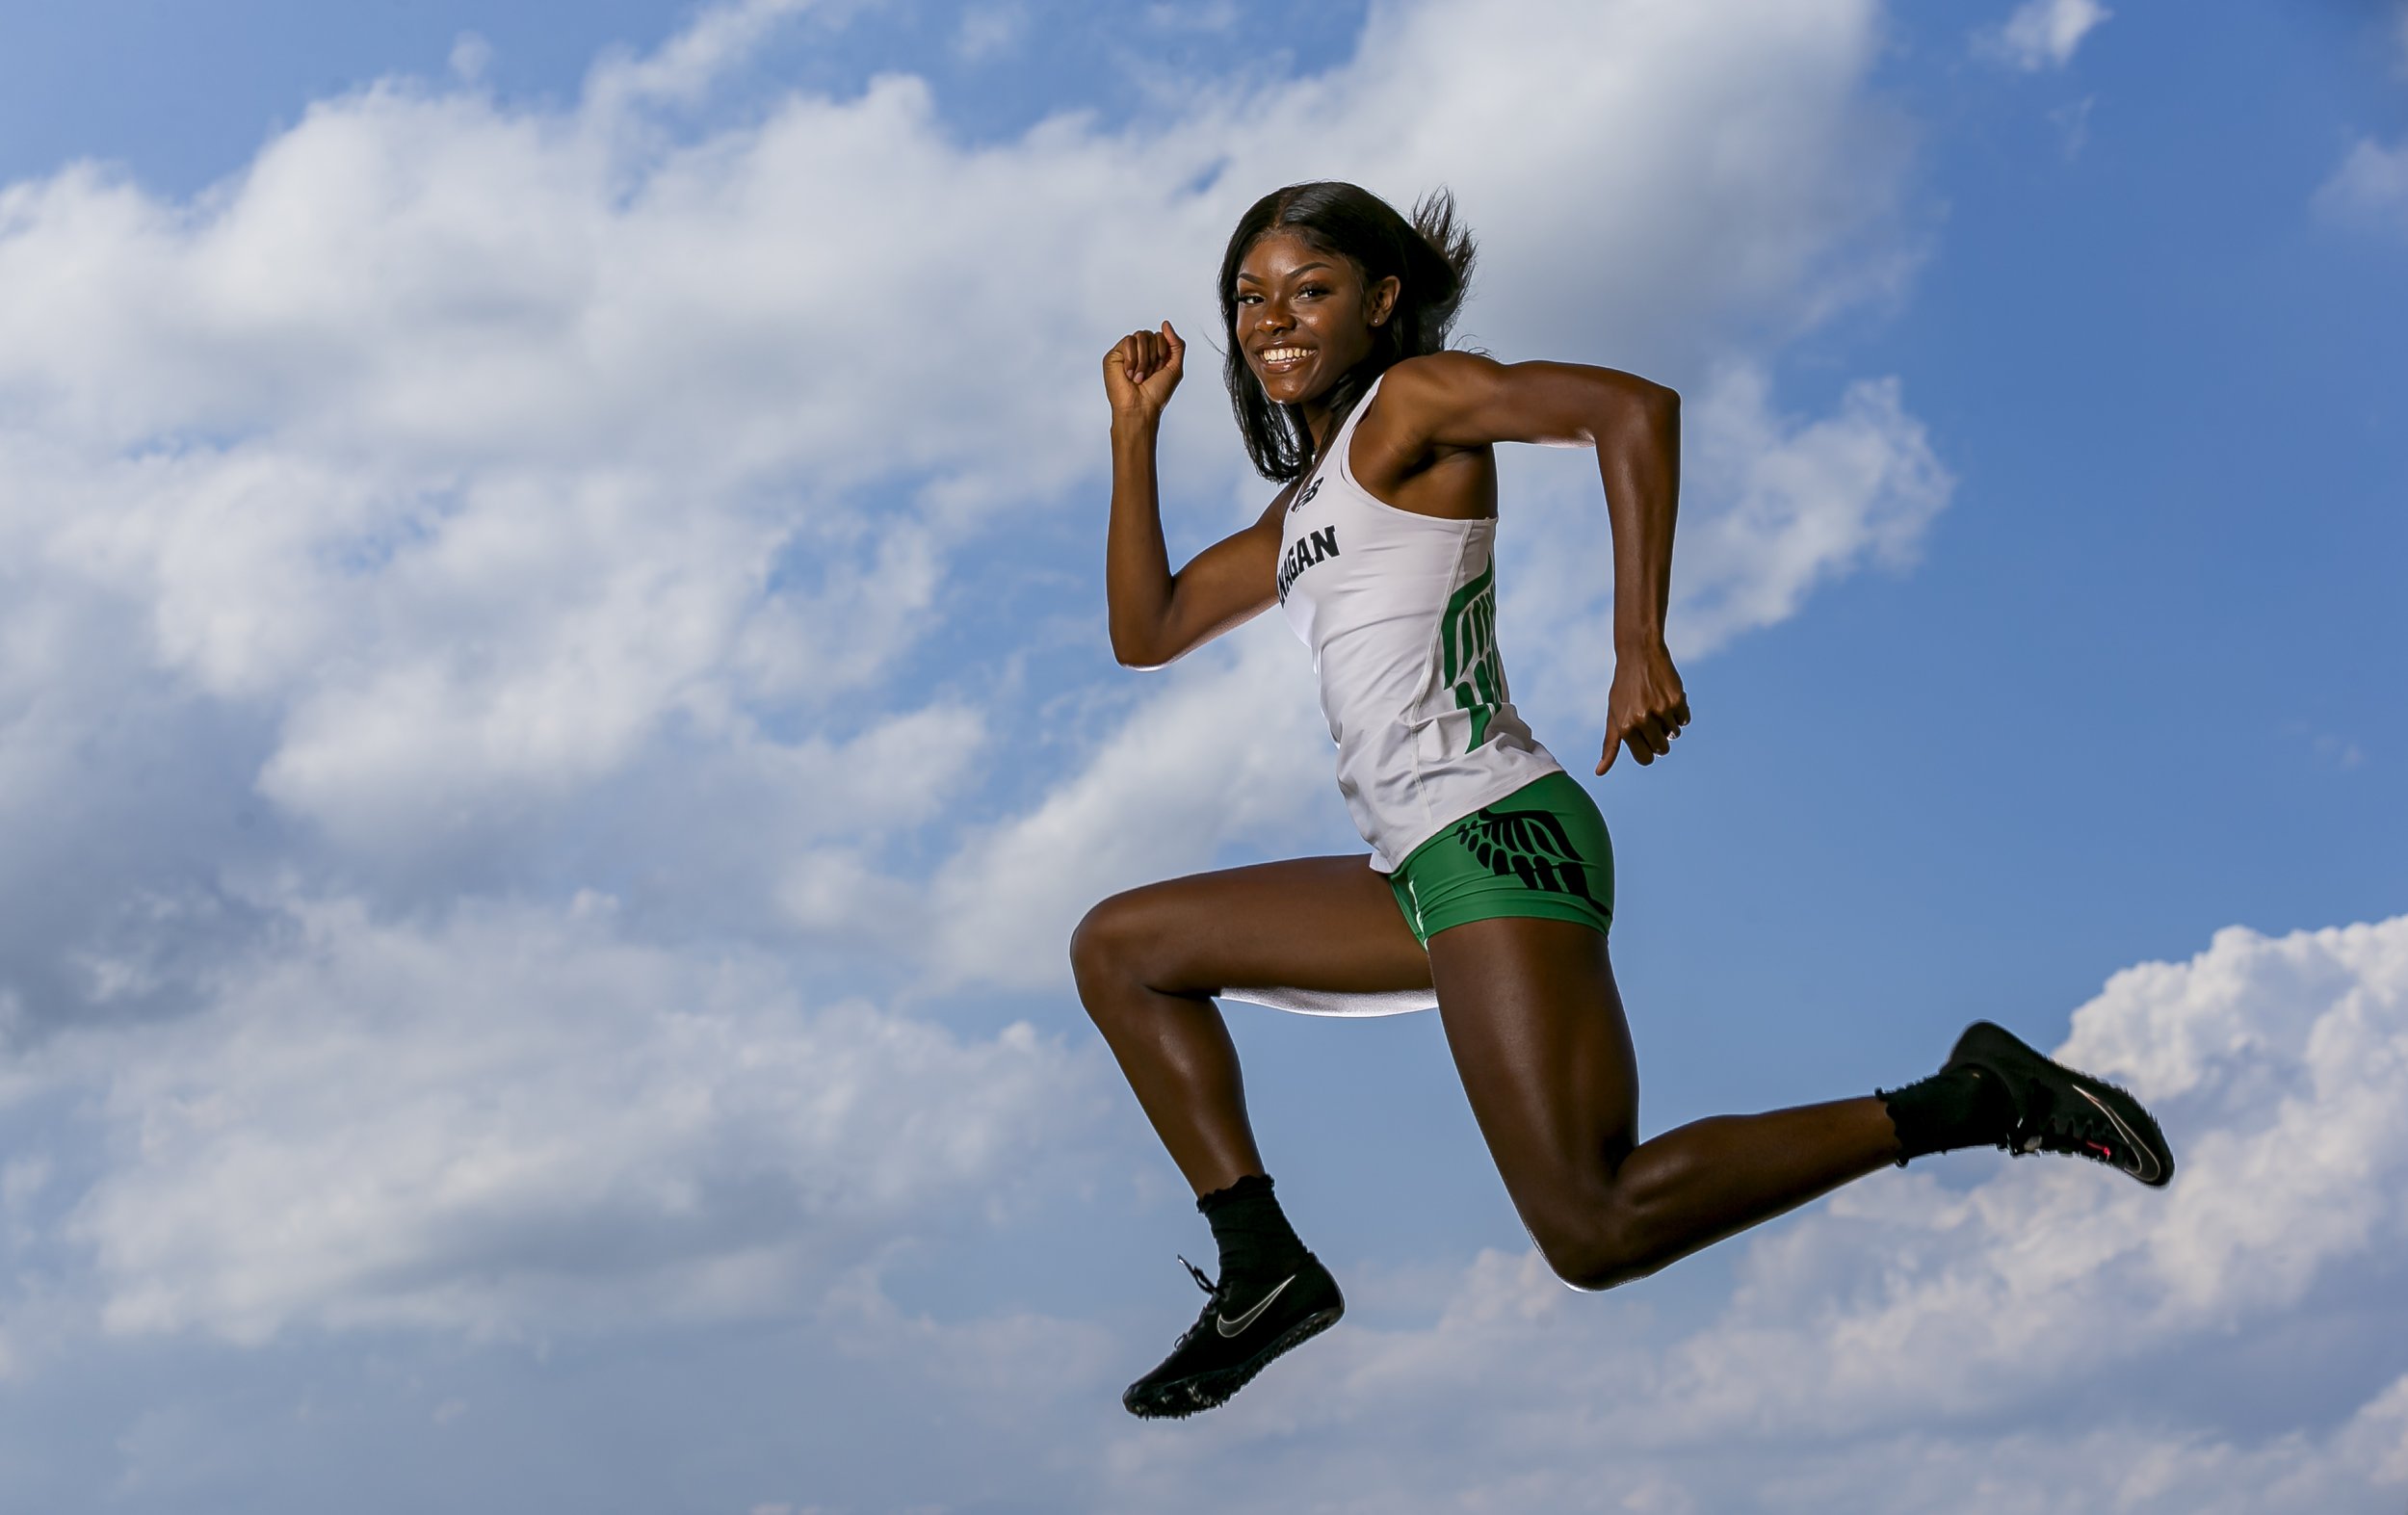 Broward Track and Field Athlete of the Year Jassani Carter, from Flanagan High School, is photographed at Brian Piccolo Park in Cooper City, Florida on Tuesday, May 17, 2022.